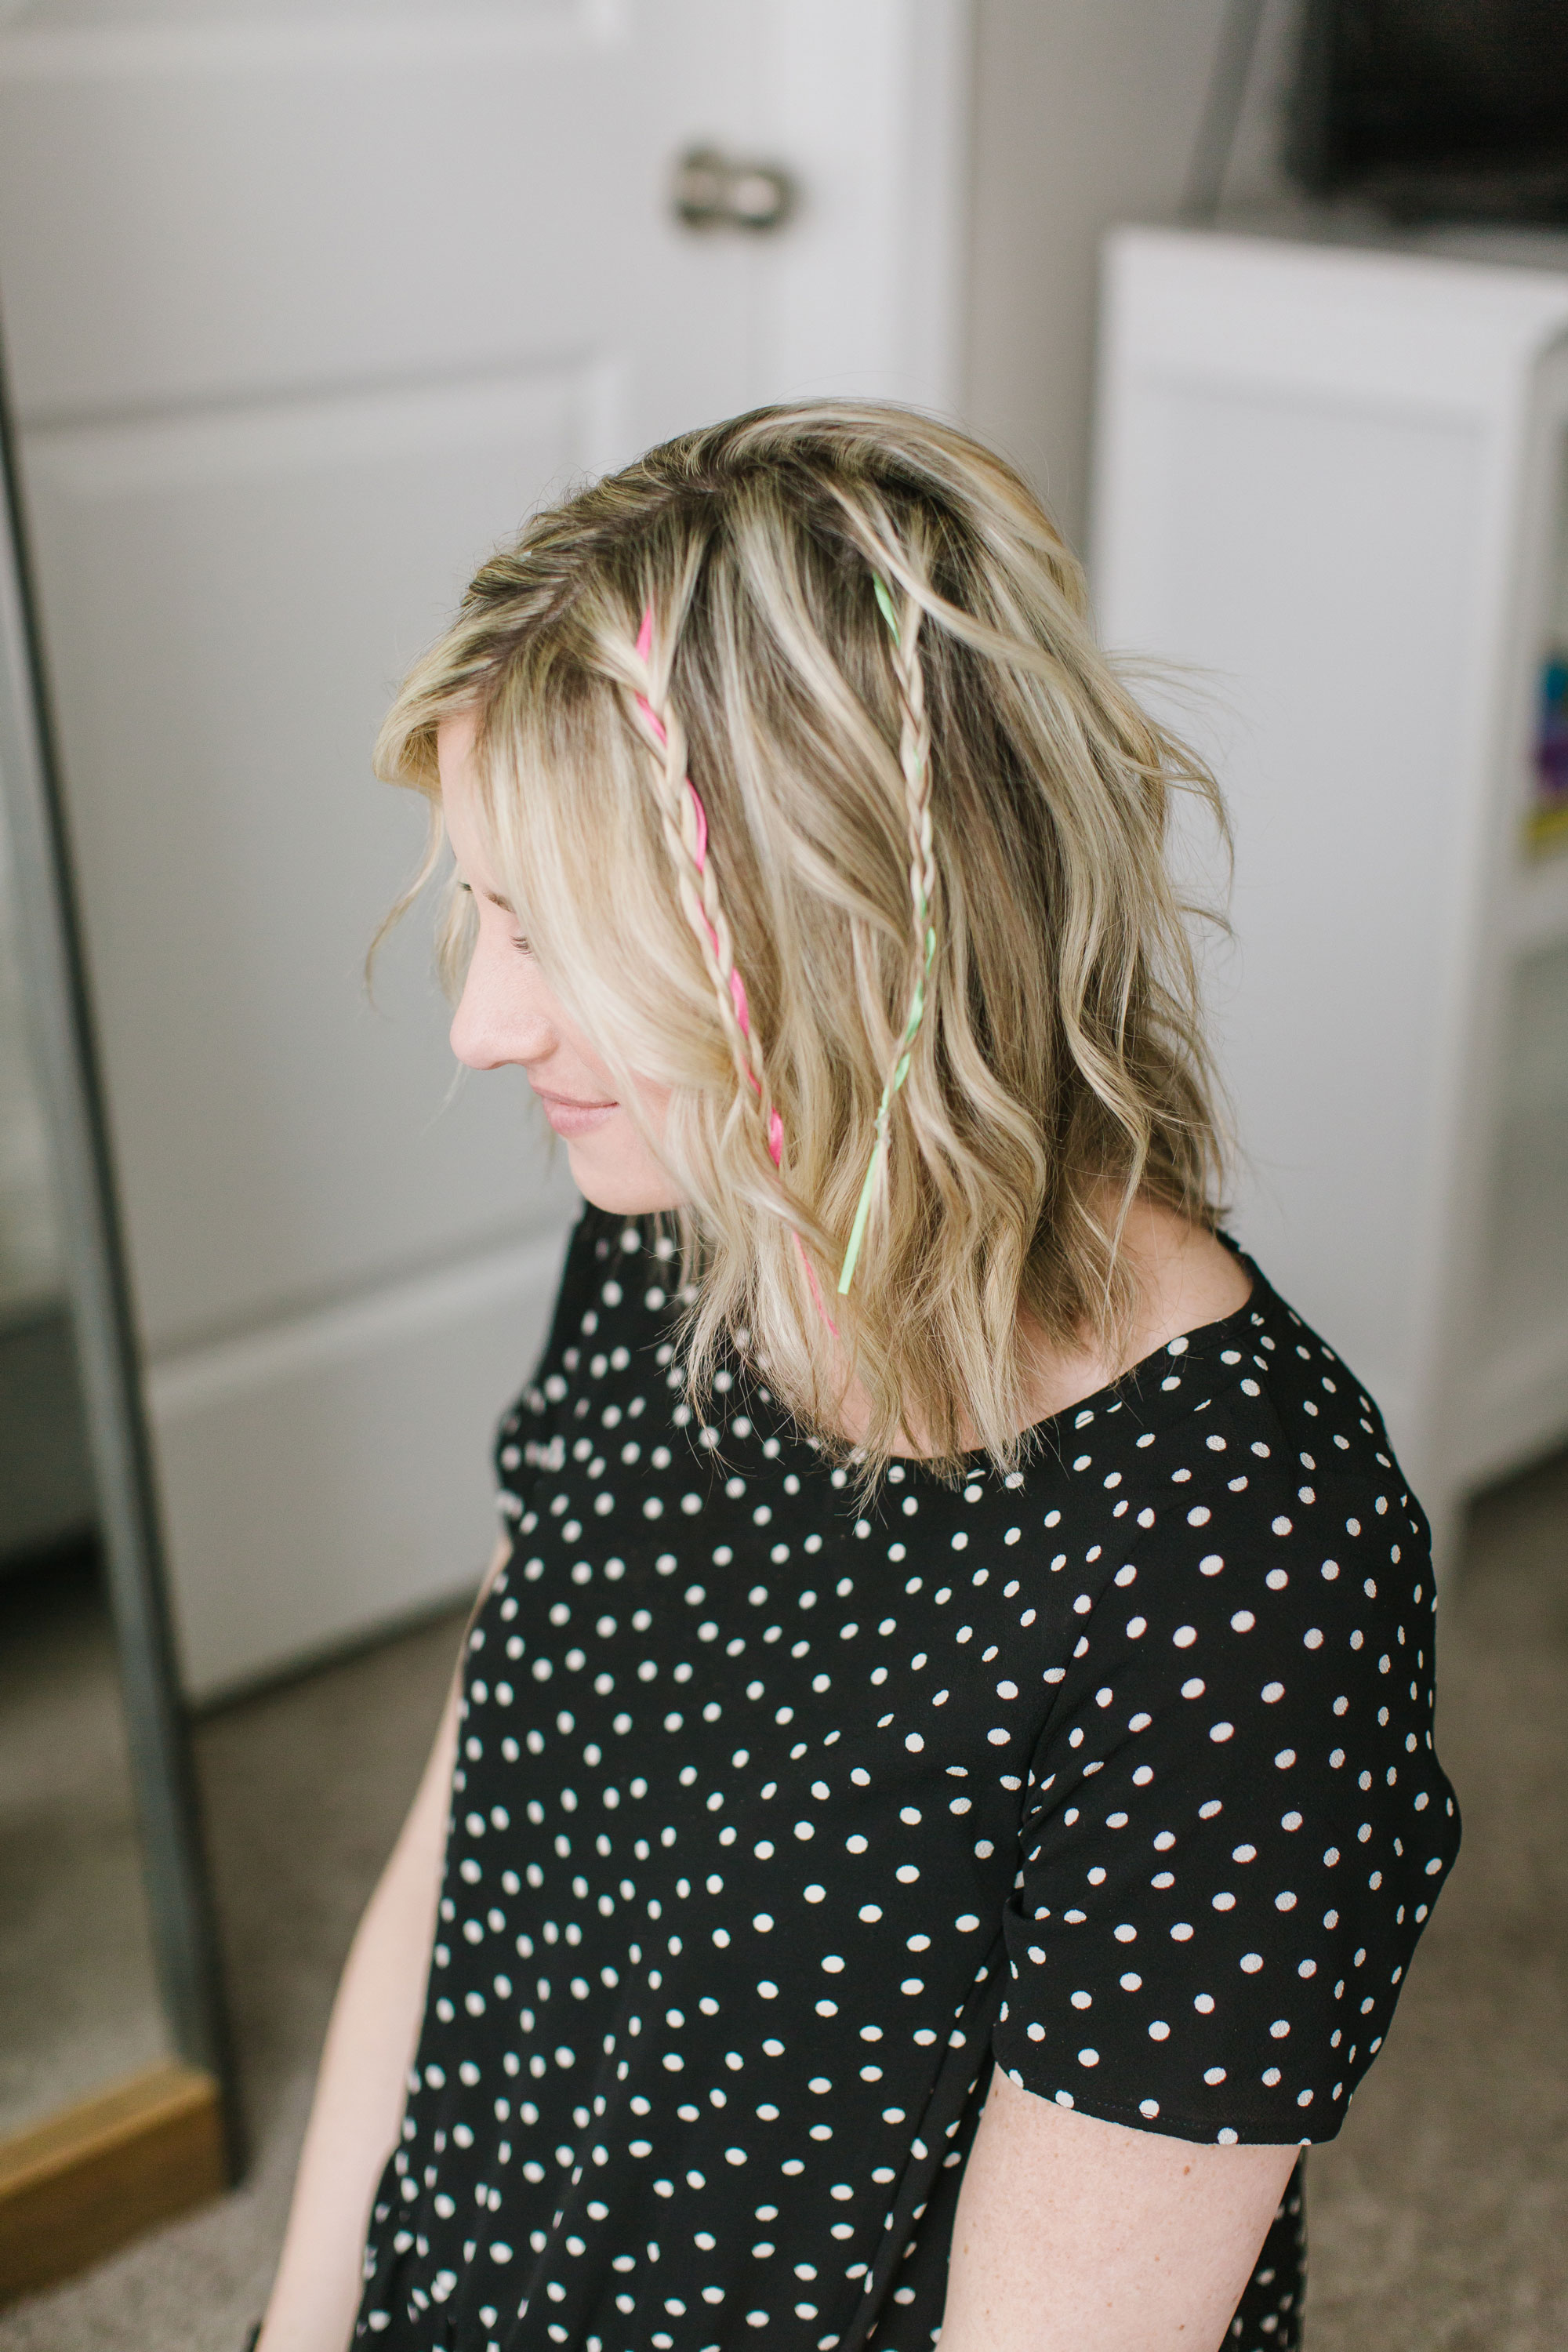 Easy Air dry beach waves to give your hair a break from heat styling.